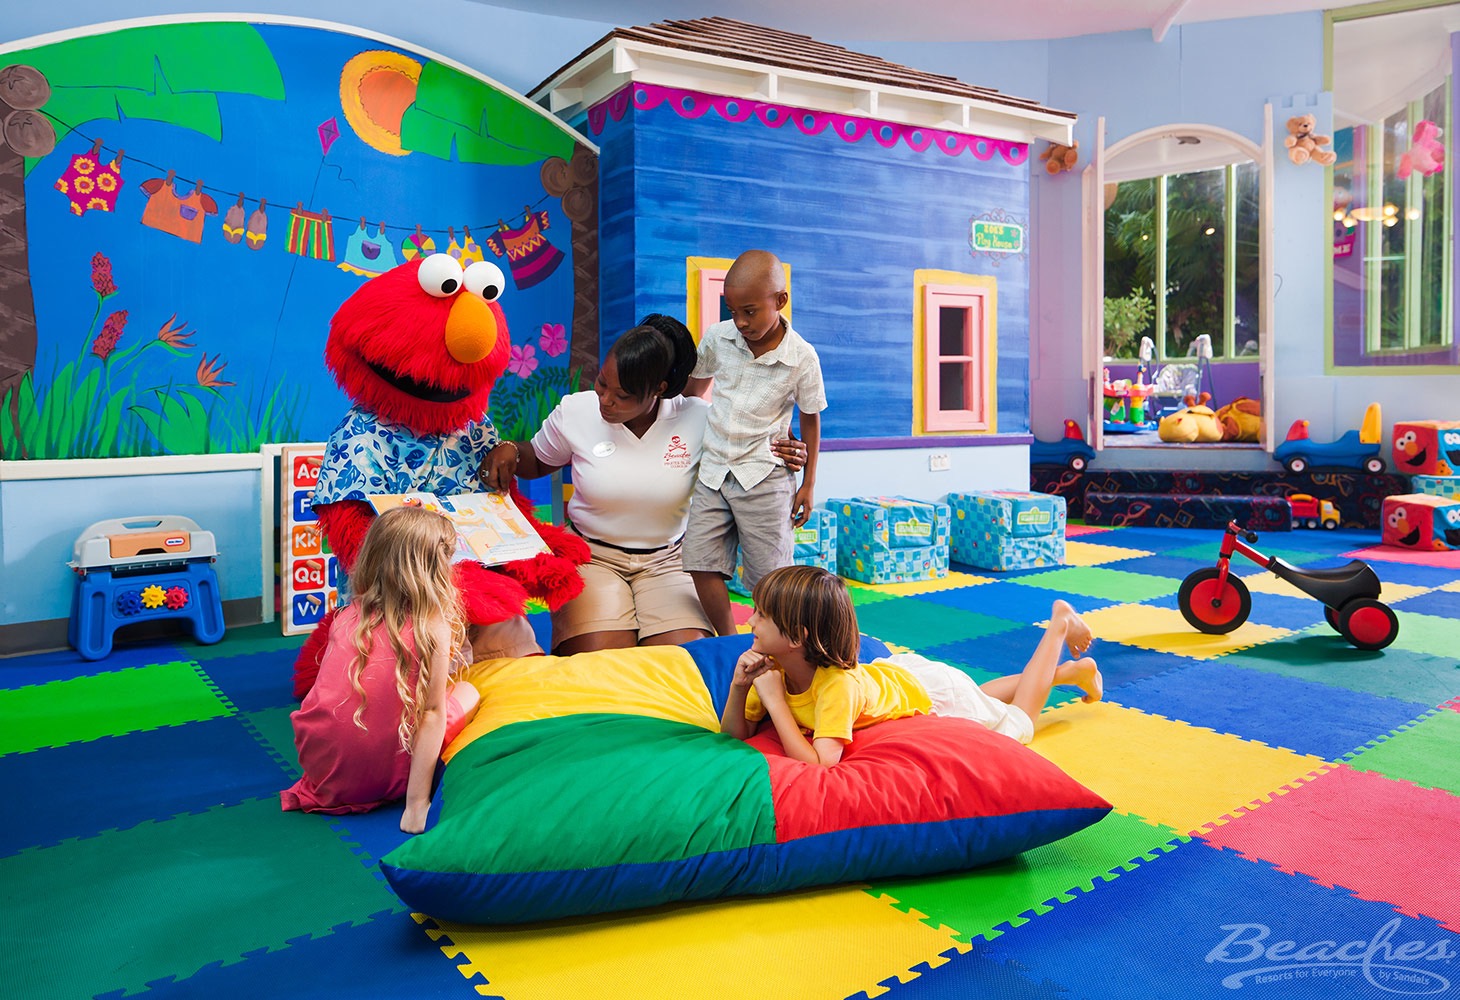 beaches resorts have some of the most popular kids clubs in the caribbean and they are for every age from baby to teen.